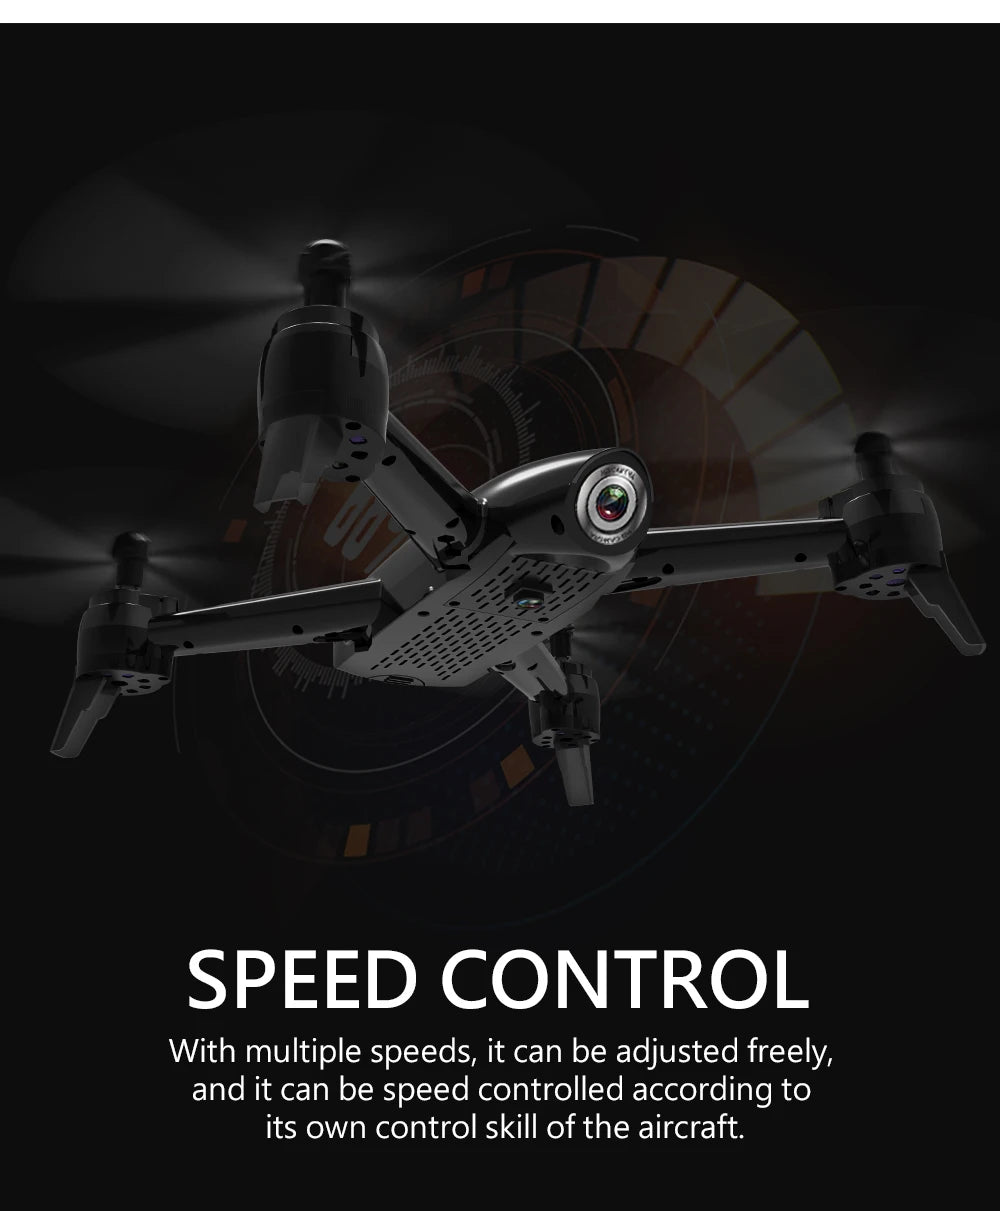 SG106 Drone, speed control with multiple speeds can be adjusted freely . it can be